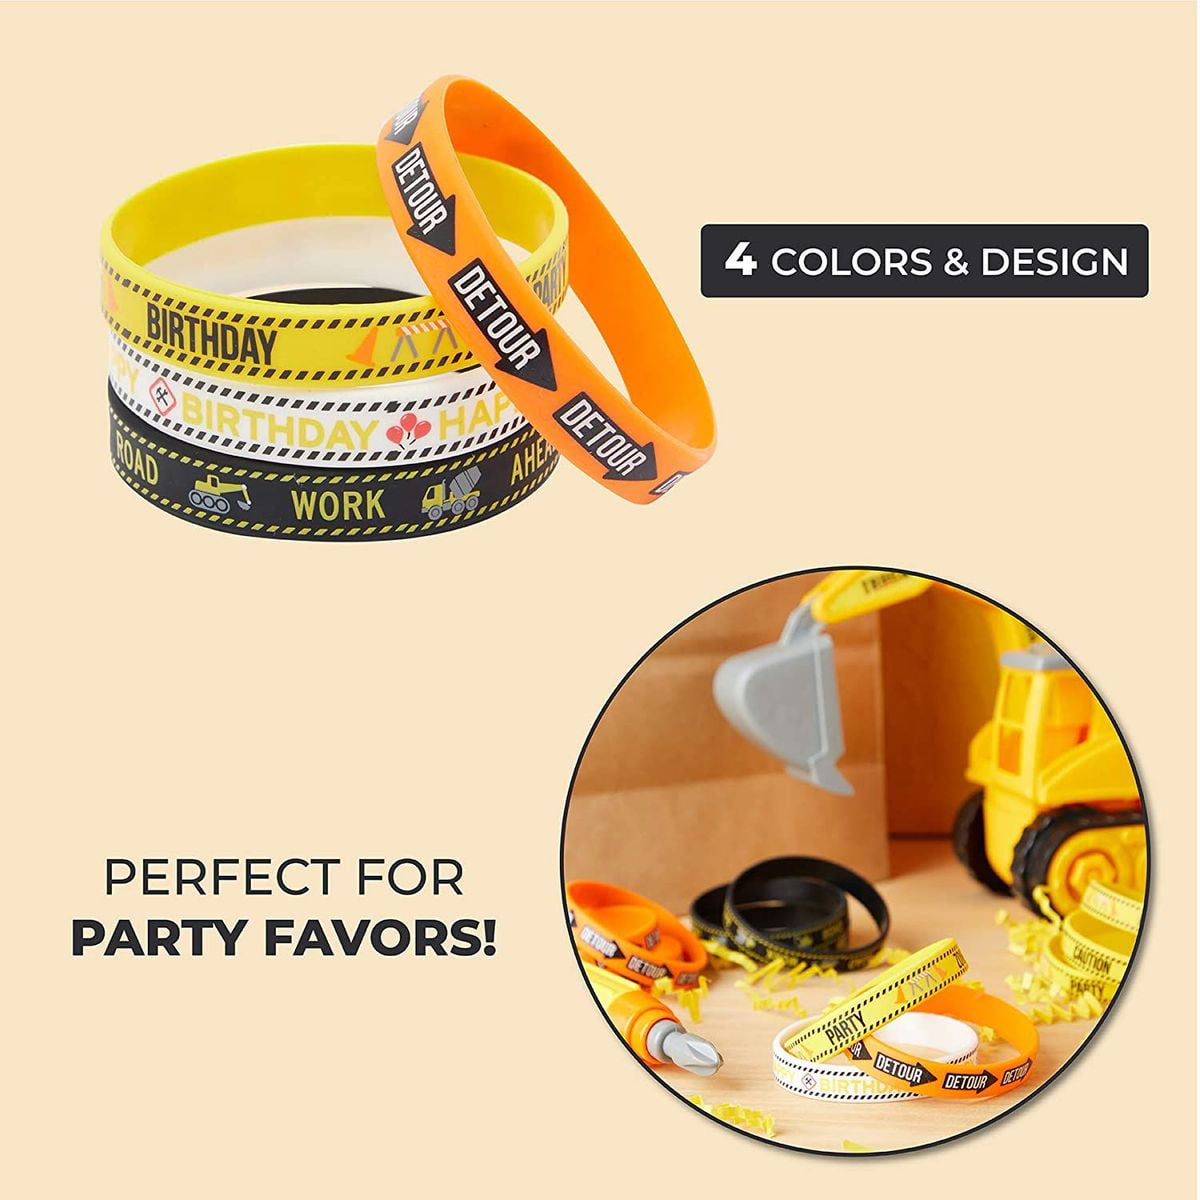 Design Rubber Bracelets by doing smart investment for your business |  WristbandBuddy Blog